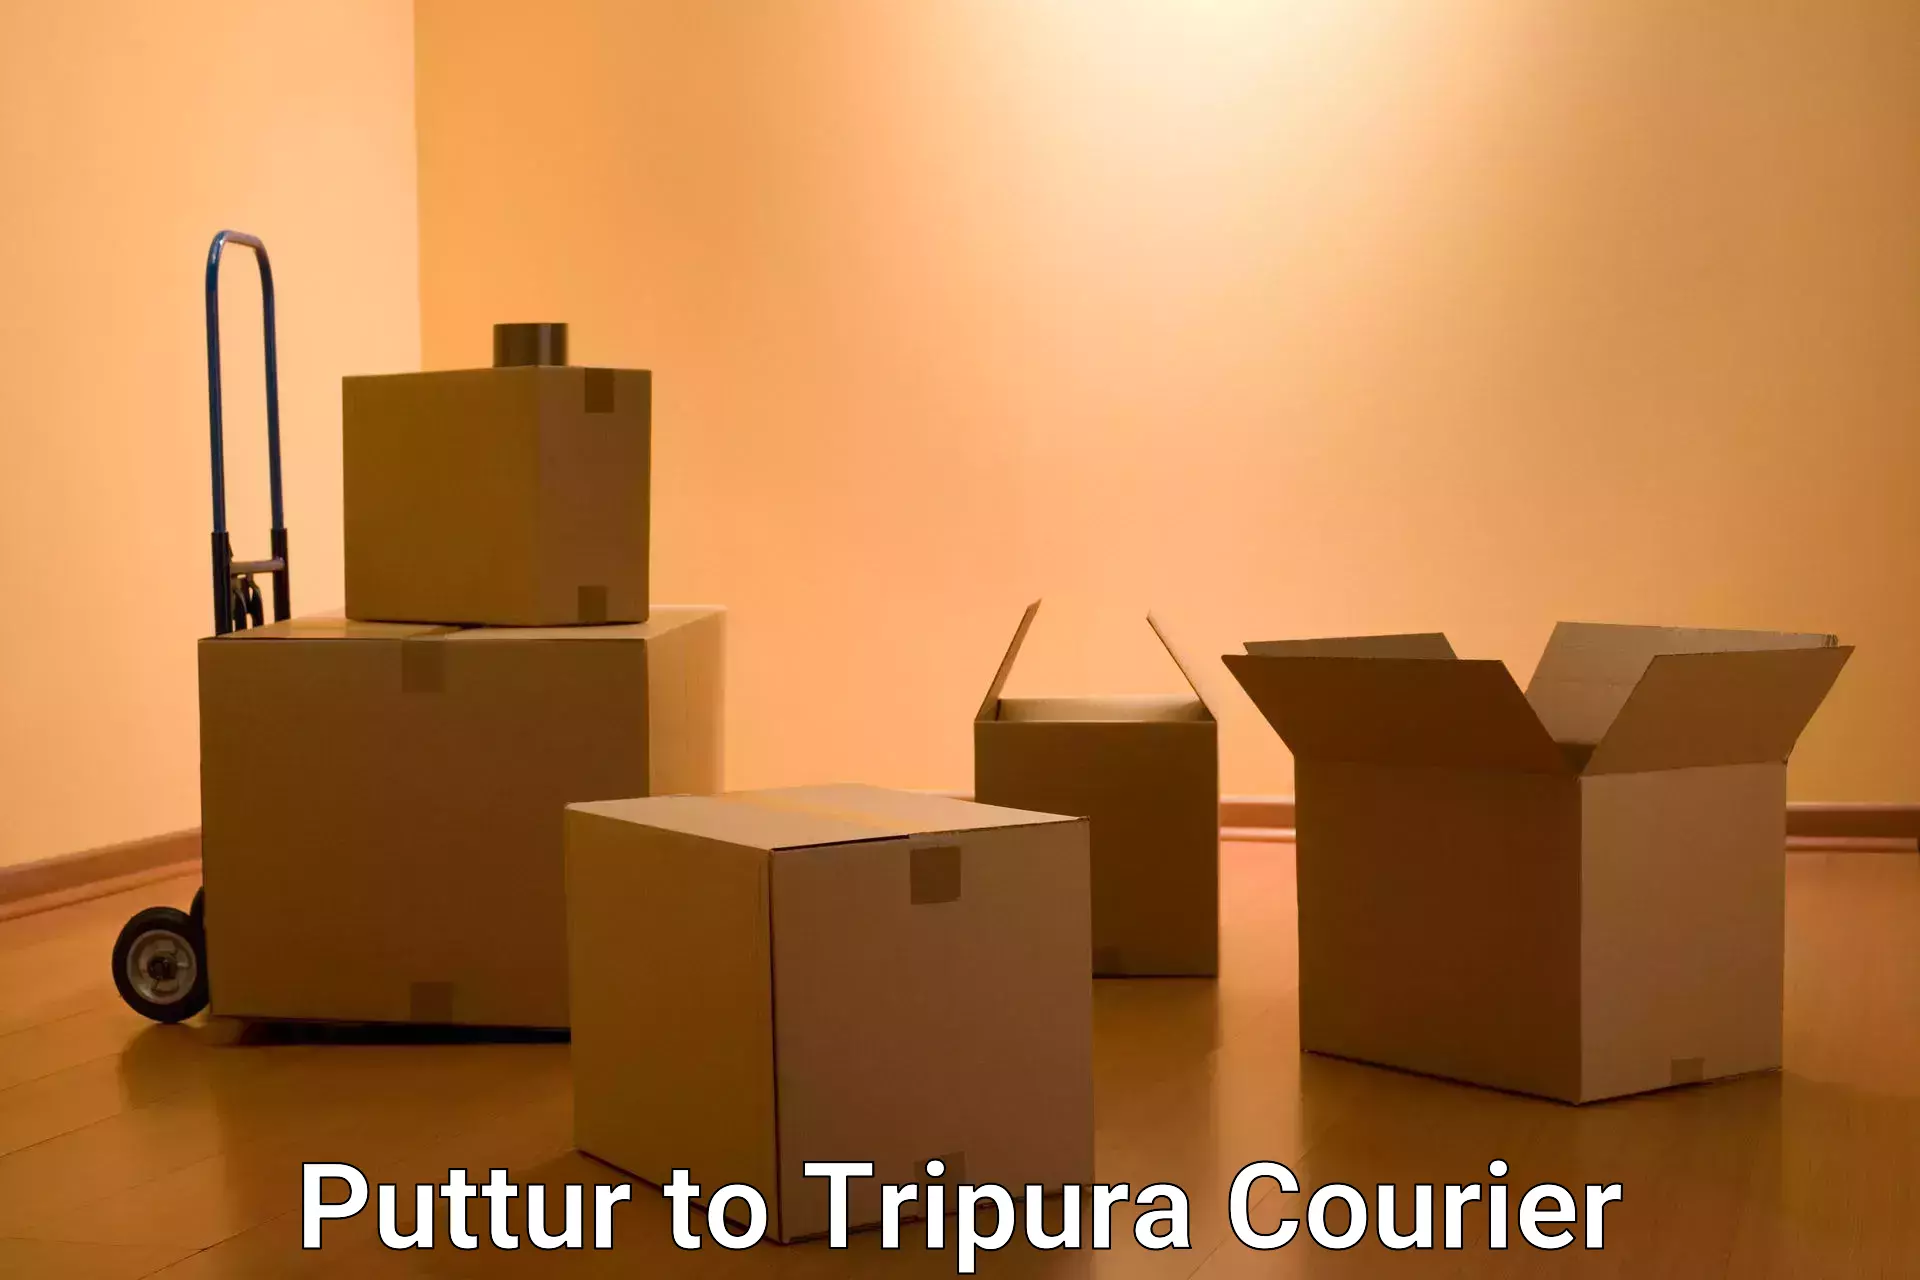 Express delivery capabilities in Puttur to Udaipur Tripura